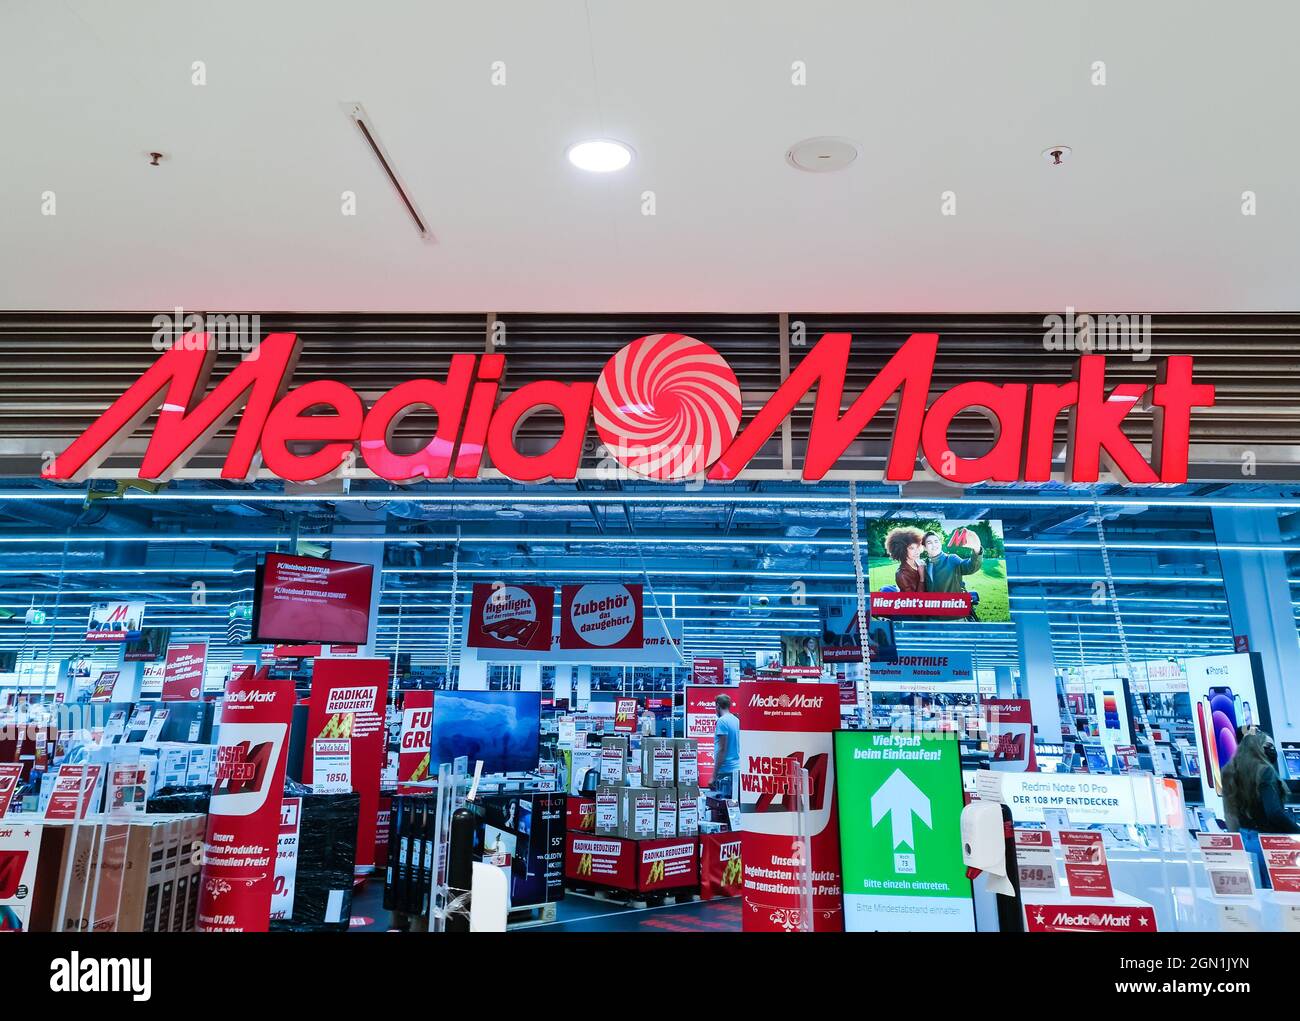 KIEL, GERMANY - Sep 03, 2021: A low-angle shot of the logo of a Media Markt store in Germany Stock Photo